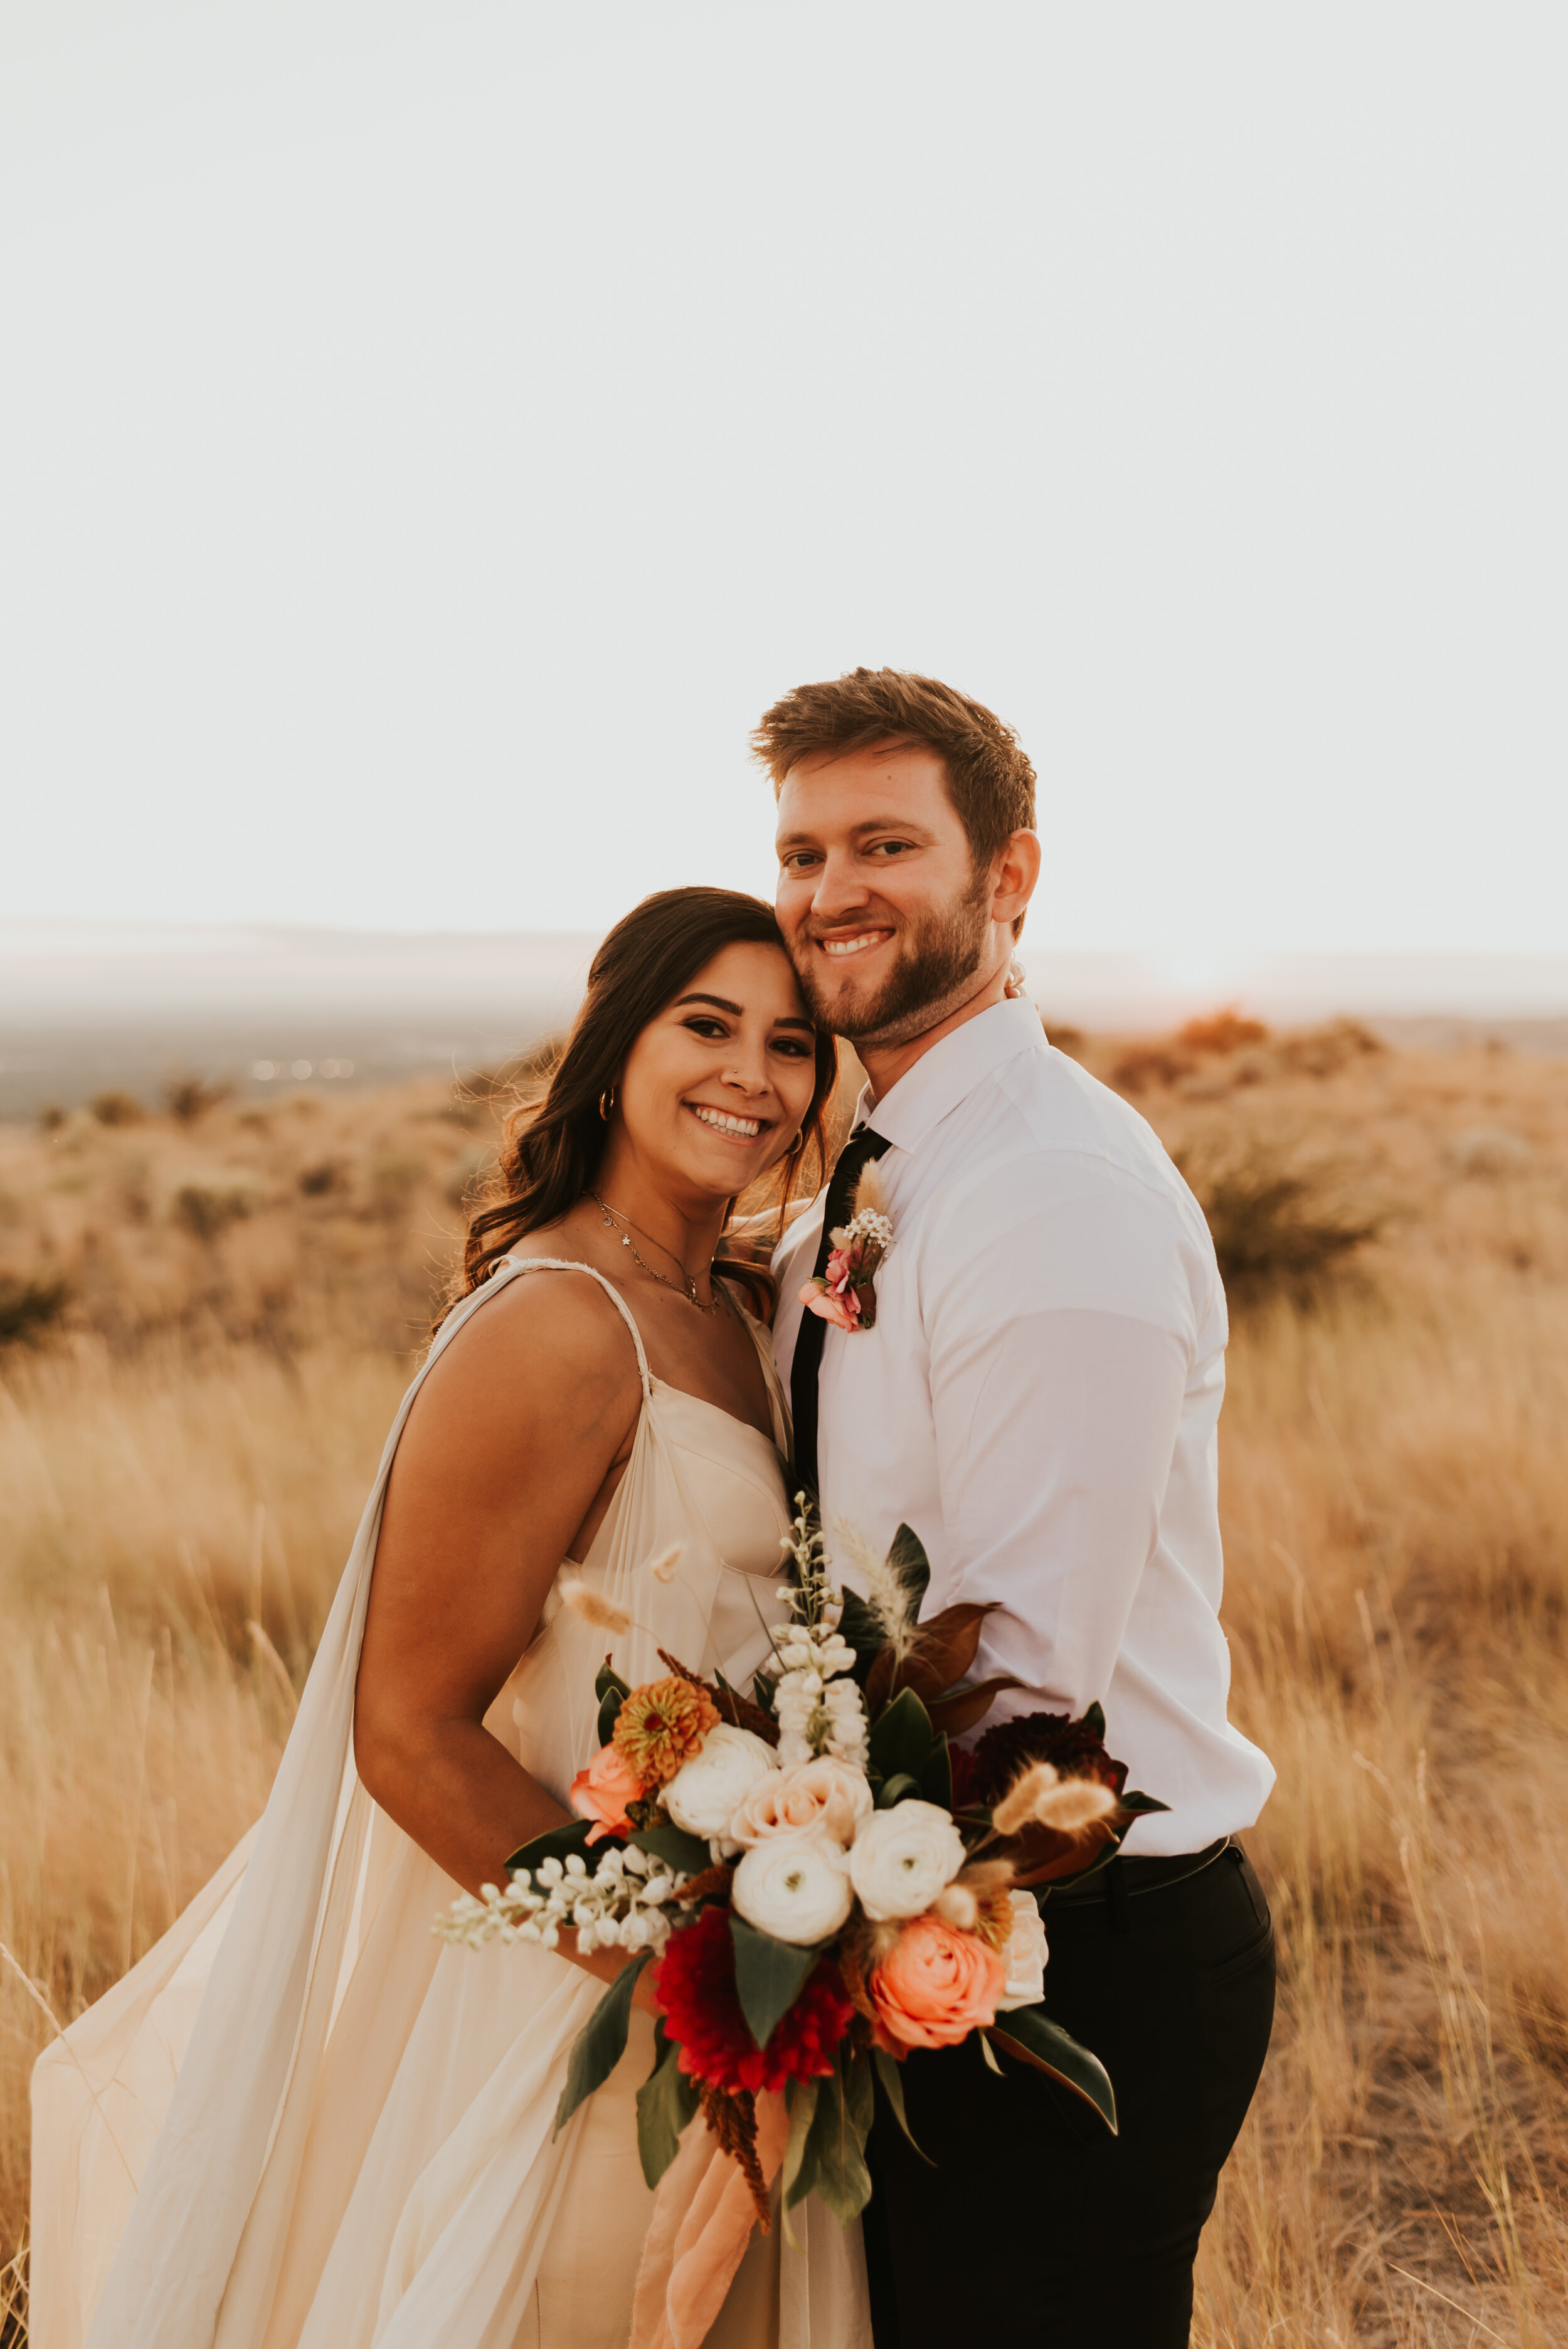 How to Include Your Family in Your Elopement | Eloping with Family | Elopement with Guests | California Elopement Photographer | Elopement Tips | Elopement Planning Advice | Intimate Wedding